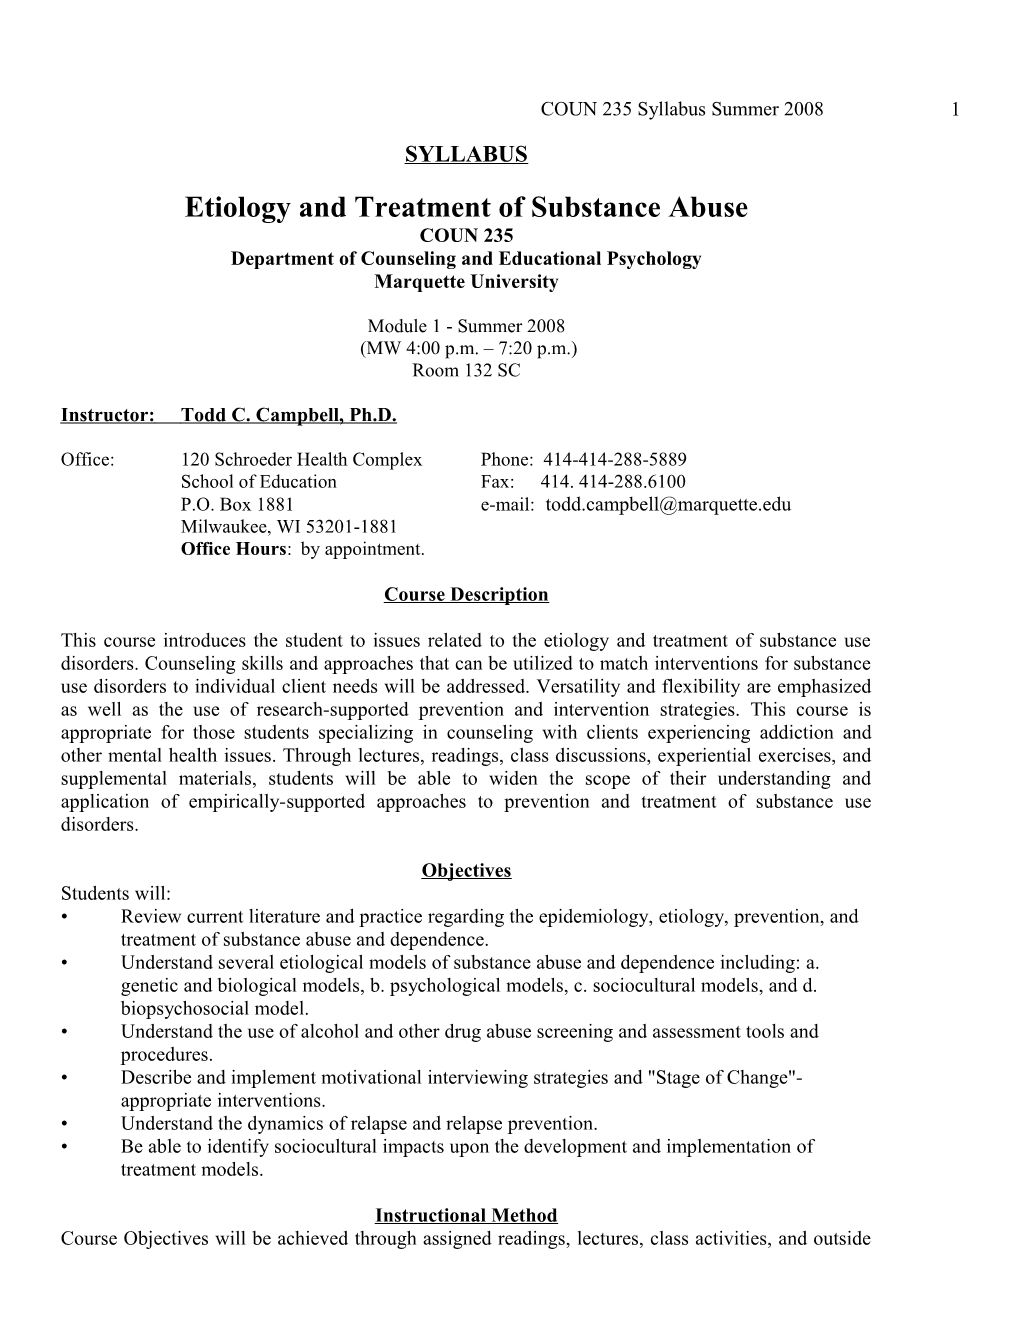 Etiology and Treatment of Sibstamce Abuse